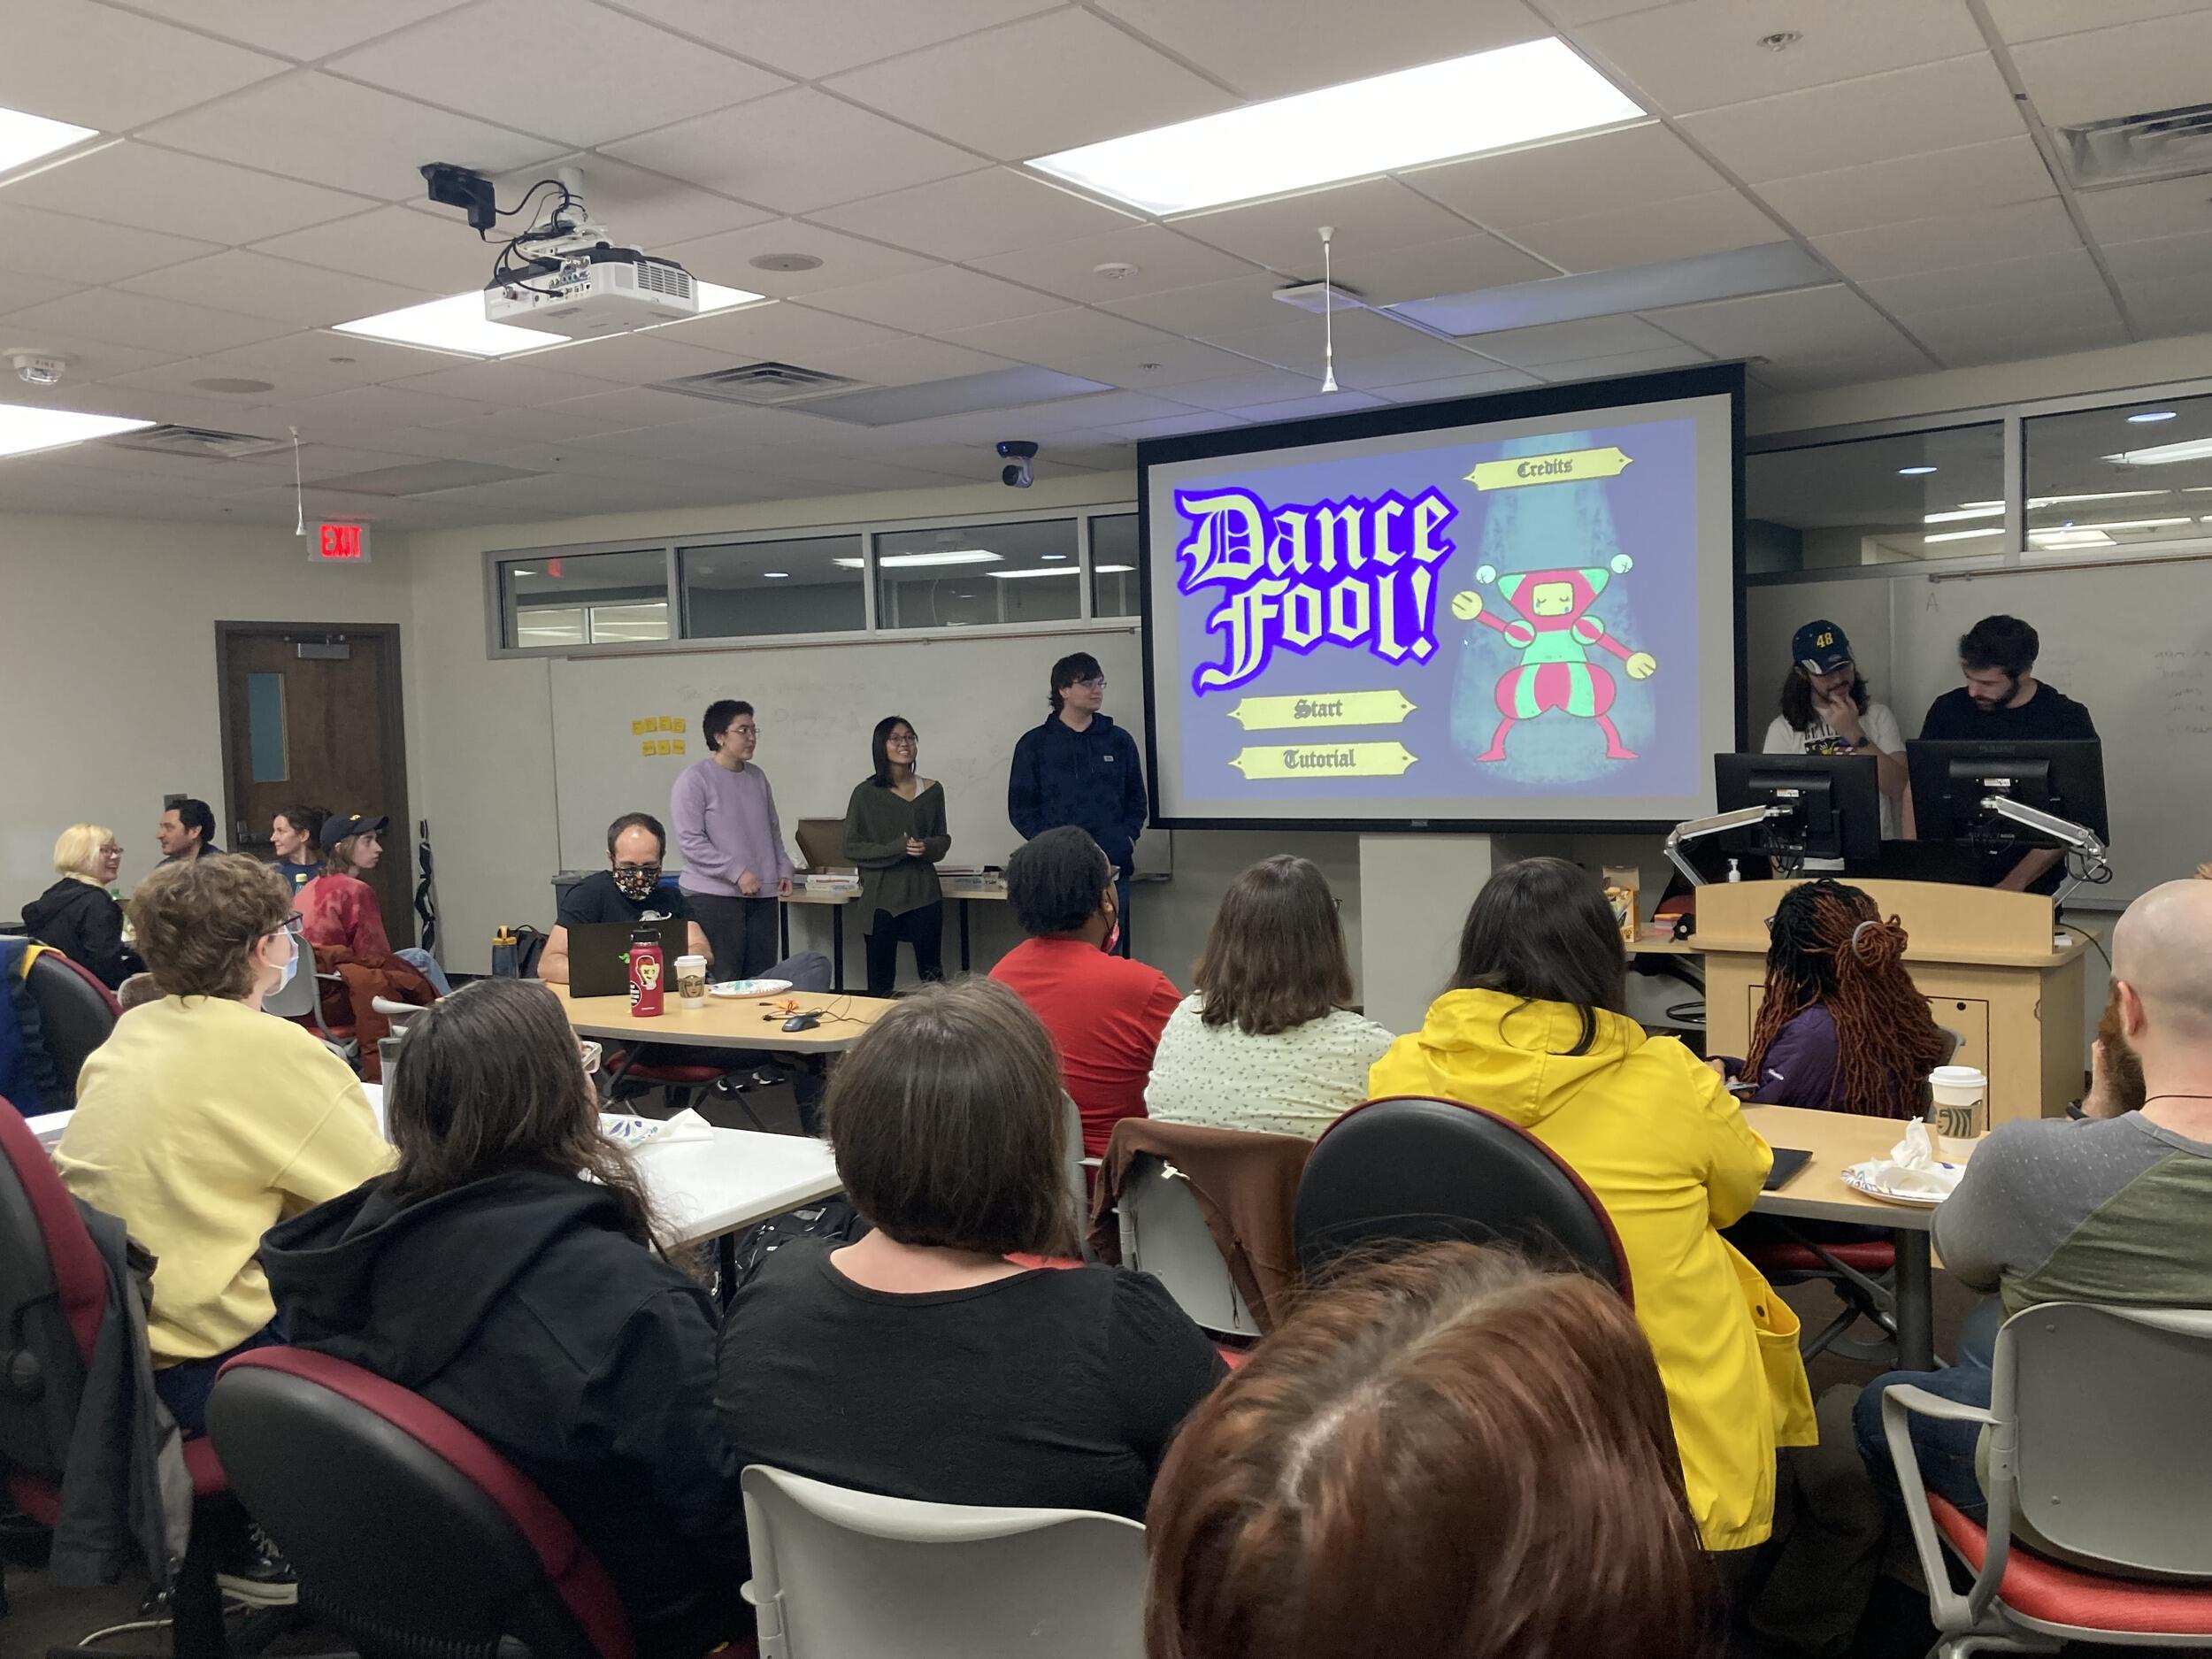 A photo of five people standing at the front of a classroom with a projector screen showing the image of a the start screen for a video game. The room is full of people sitting at tables watching the group presenting. 